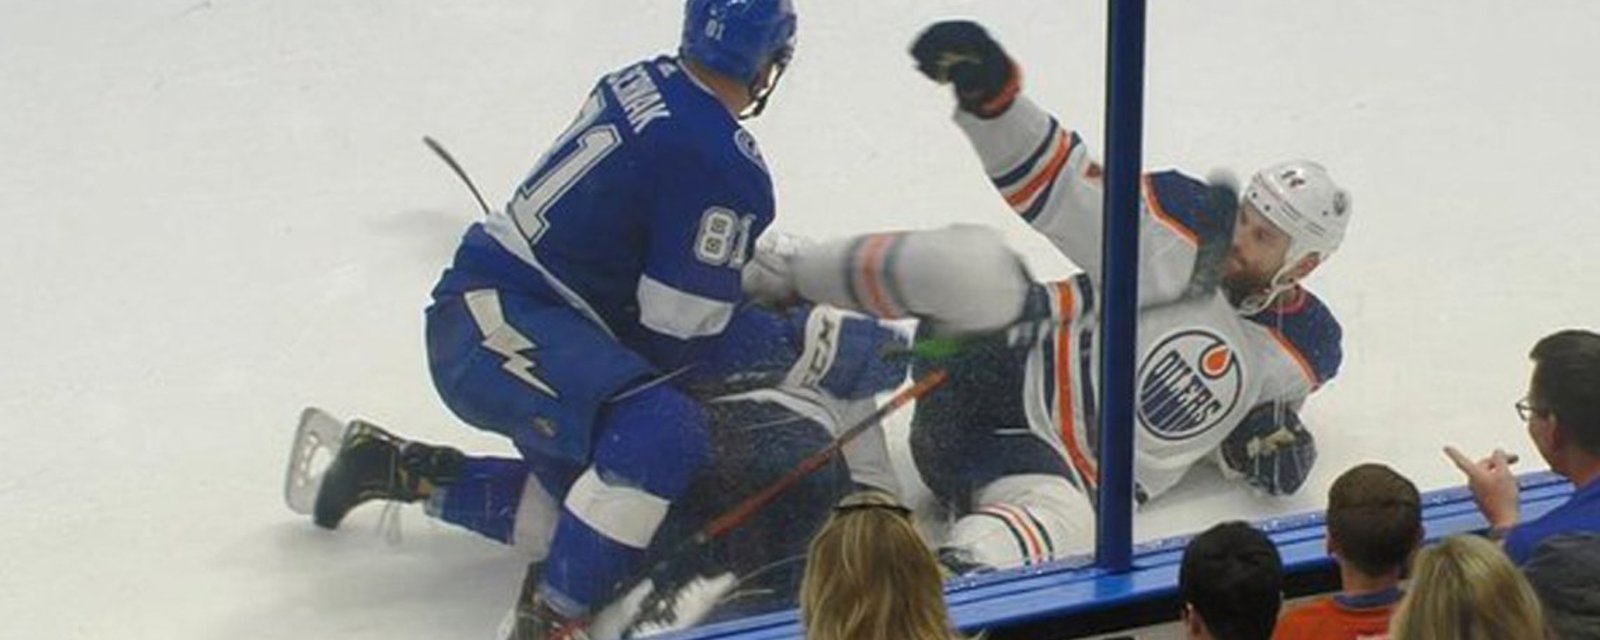 Kassian gets huge suspension for kicking Cernak right in the chest! 